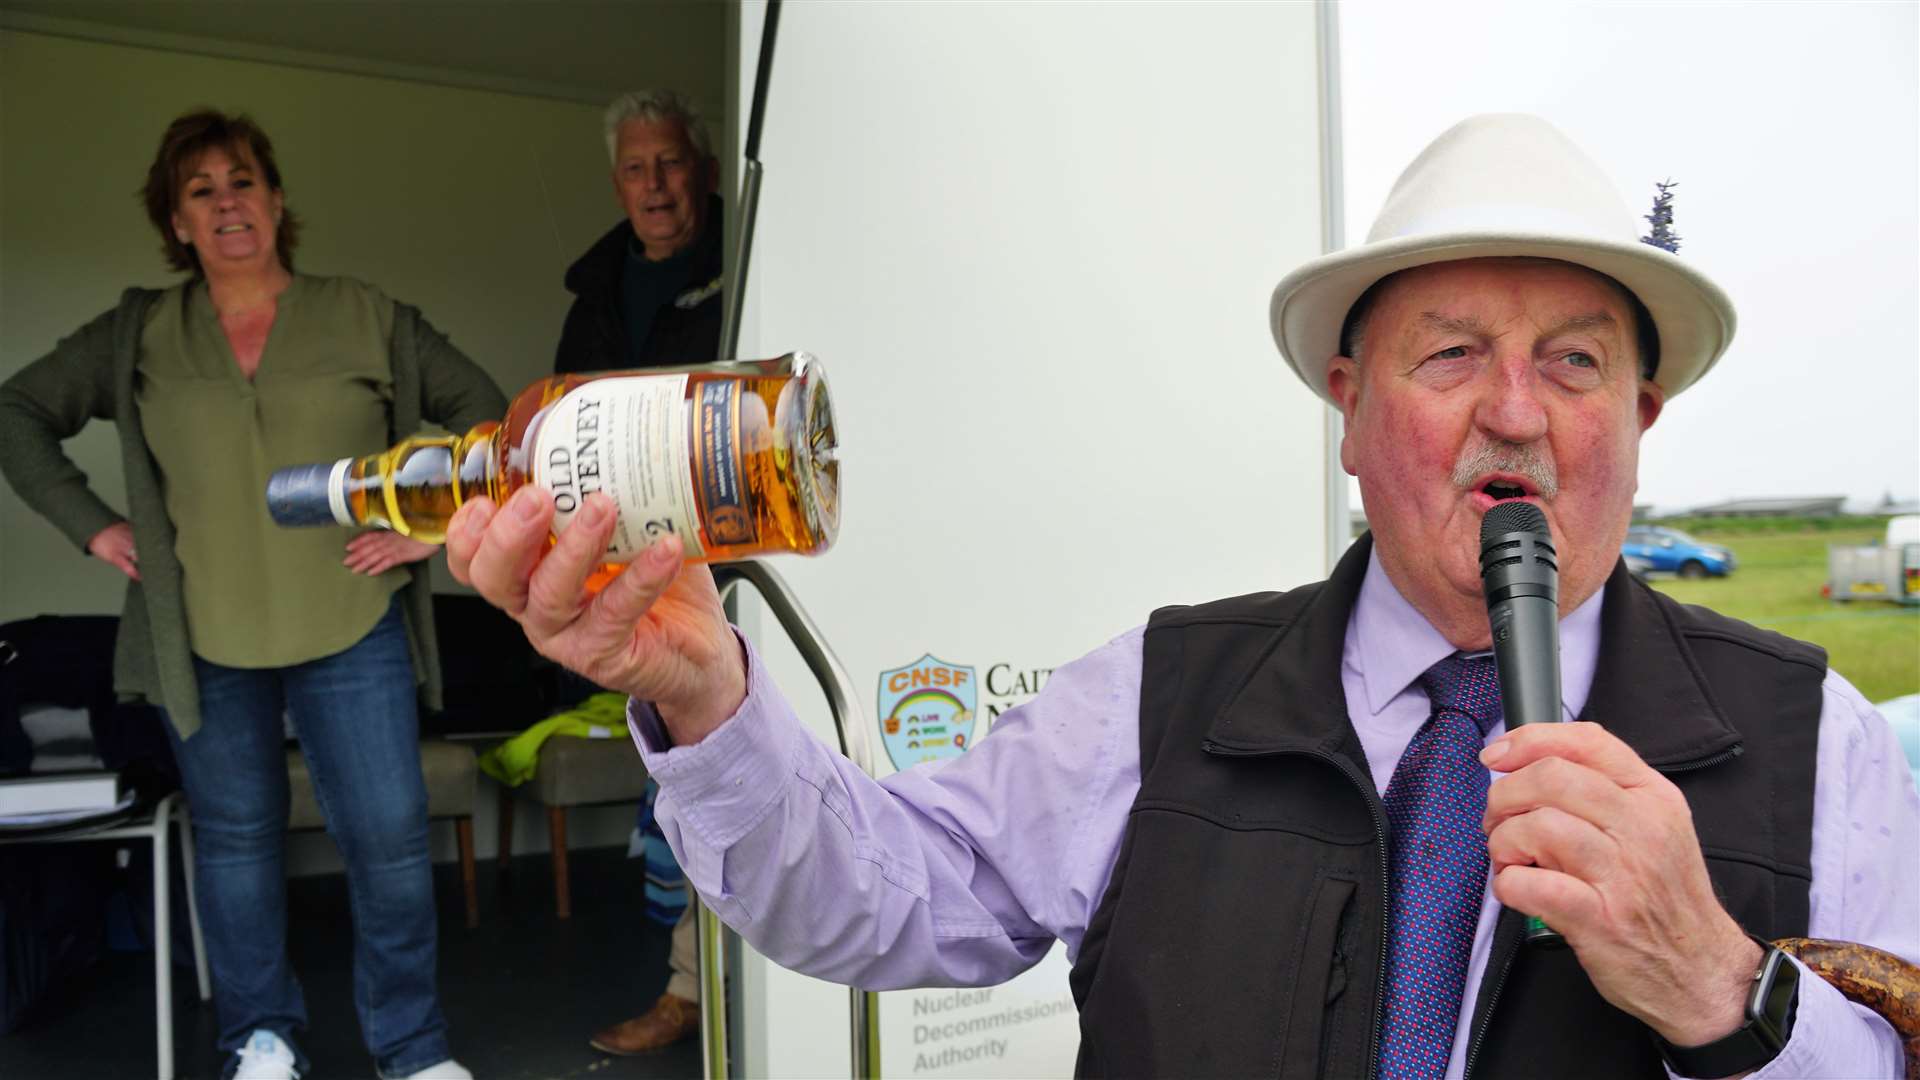 Willie Mackay was gifted whisky for his compering work on the day. He joked that the best before date was the next day so he would have to polish the bottle off that night. Picture: DGS